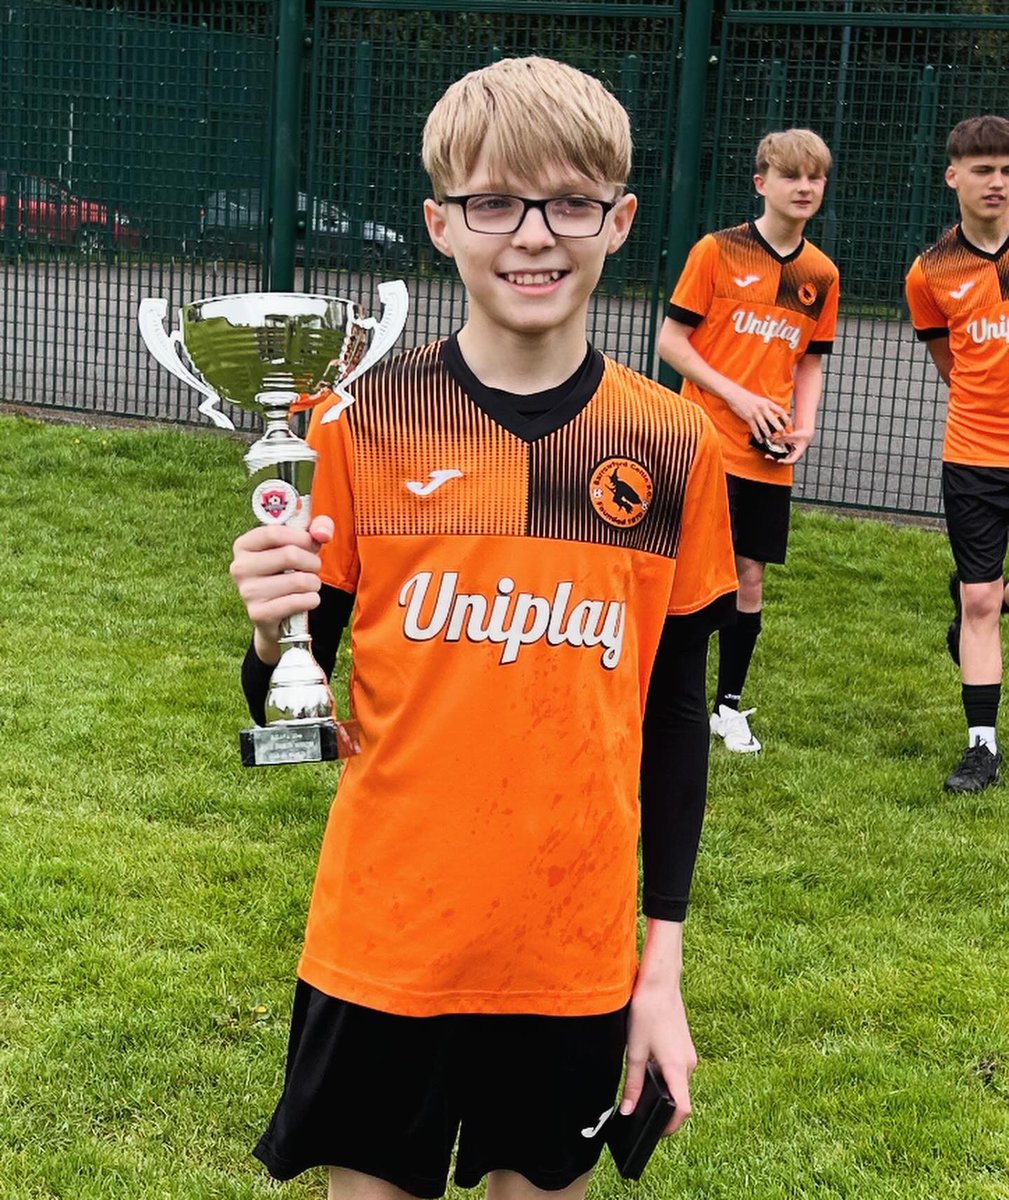 The reason why we weren’t open today!

League winners u14 Accrington & District 2014 x

They worked hard for this one, his first winners medal!! Only taken him 10 years 😅😛 #proudparents #futuresbright